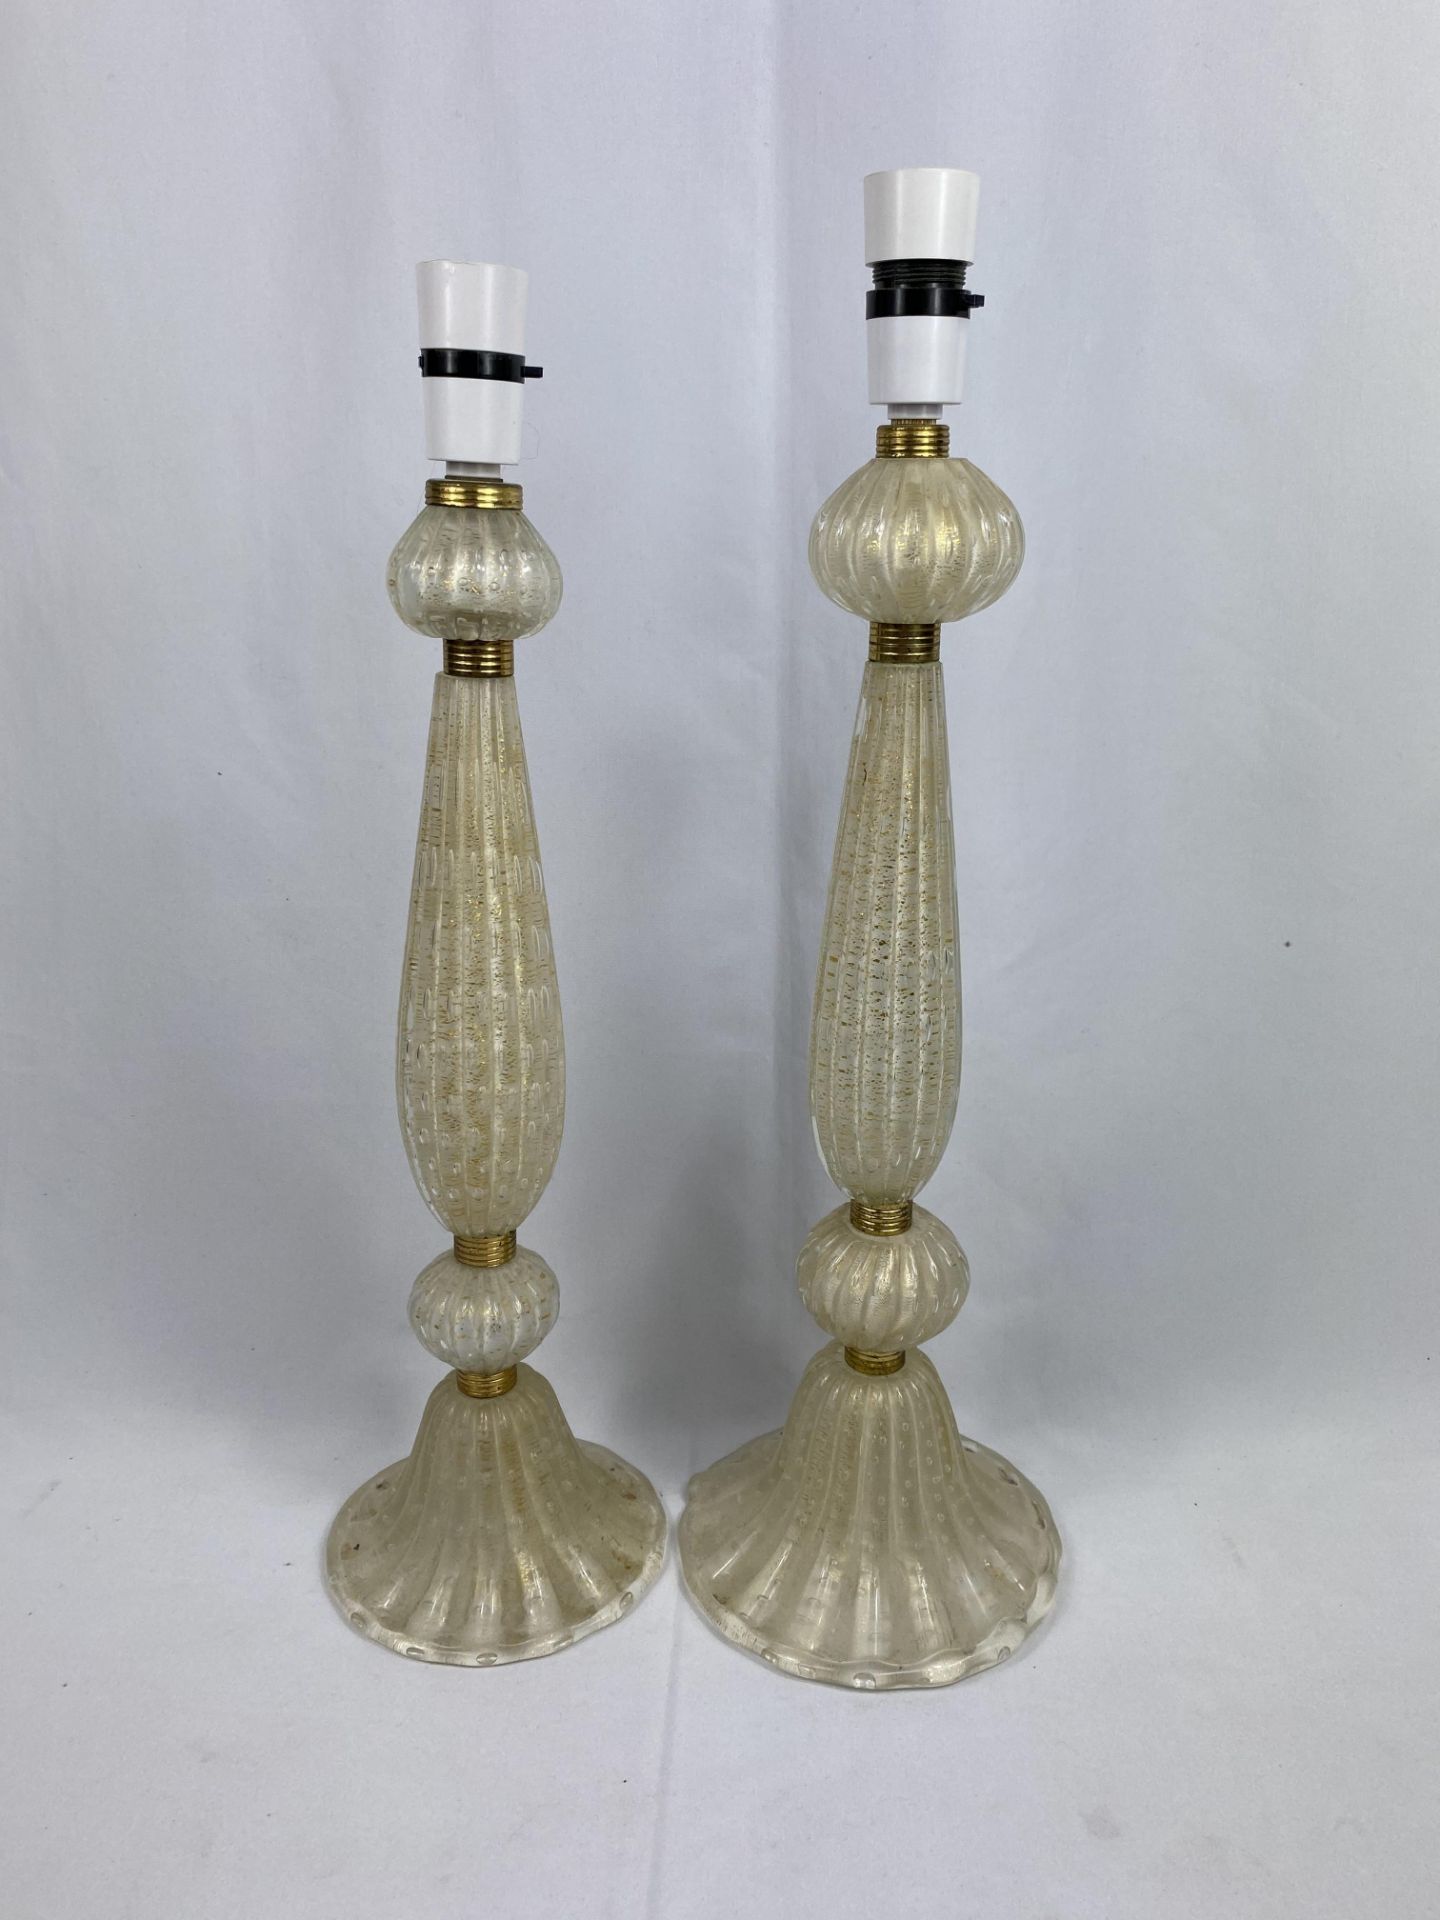 Pair of Barovier & Toso style Murano glass table lamps - Image 6 of 6